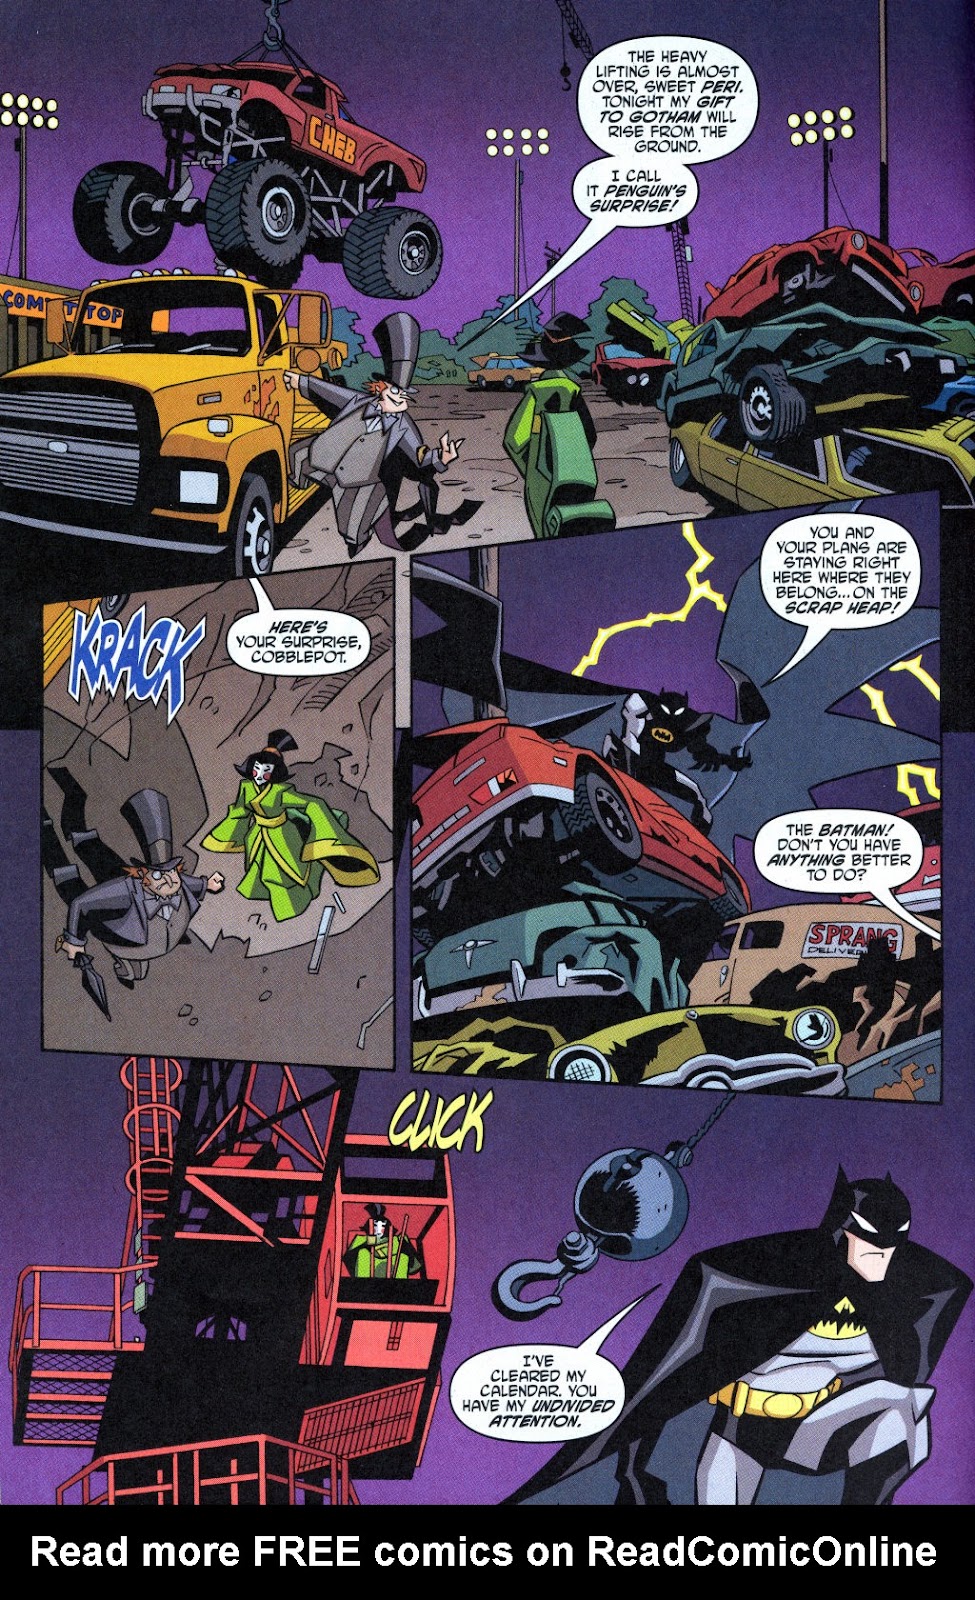 The Batman Strikes! issue 1 (Burger King Giveaway Edition) - Page 16